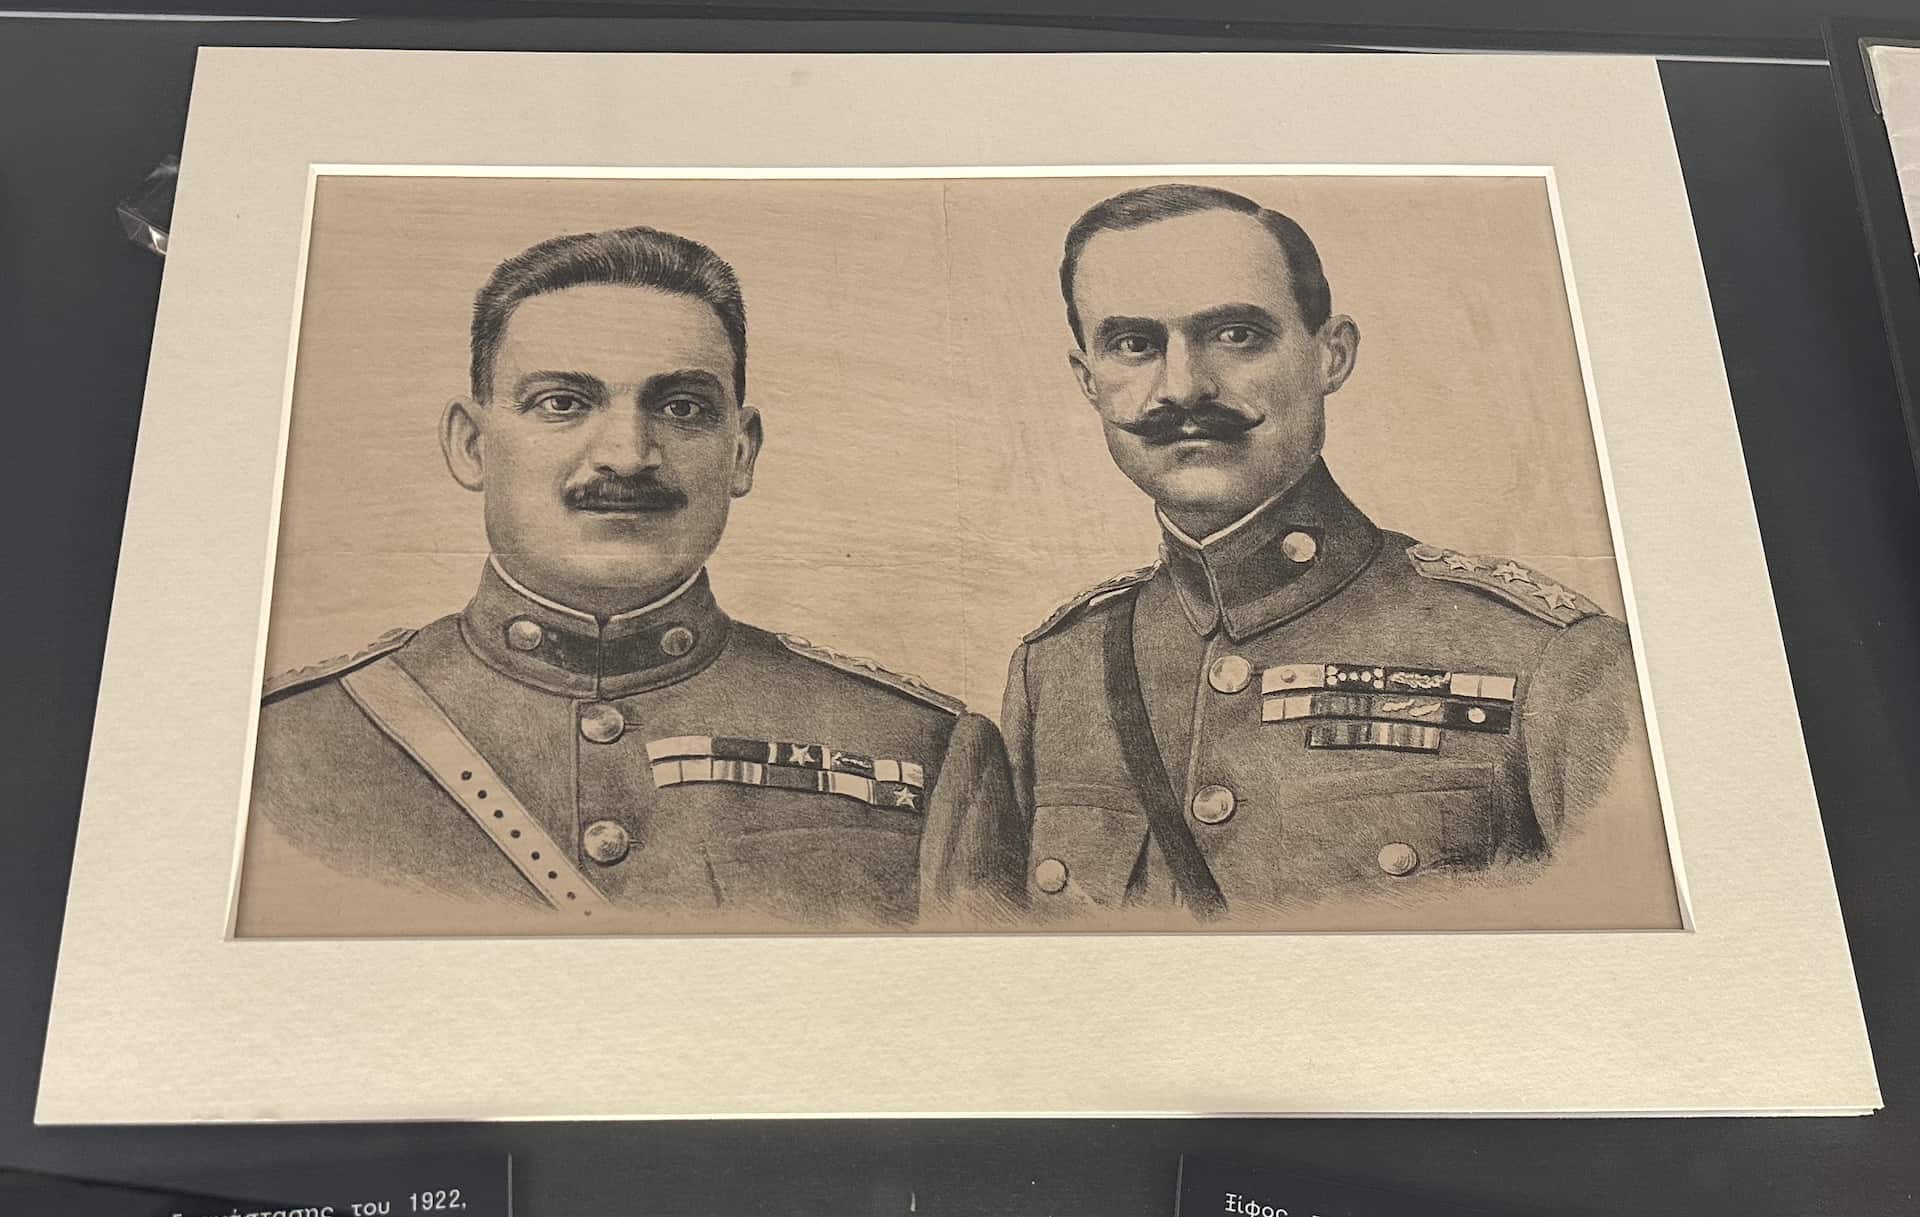 The leaders of the 11 September 1922 Revolution, Colonel Stylianos Gonatas (1876-1966) (left) and Colonel Nikolaos Plastiras (1883-1953) (right)